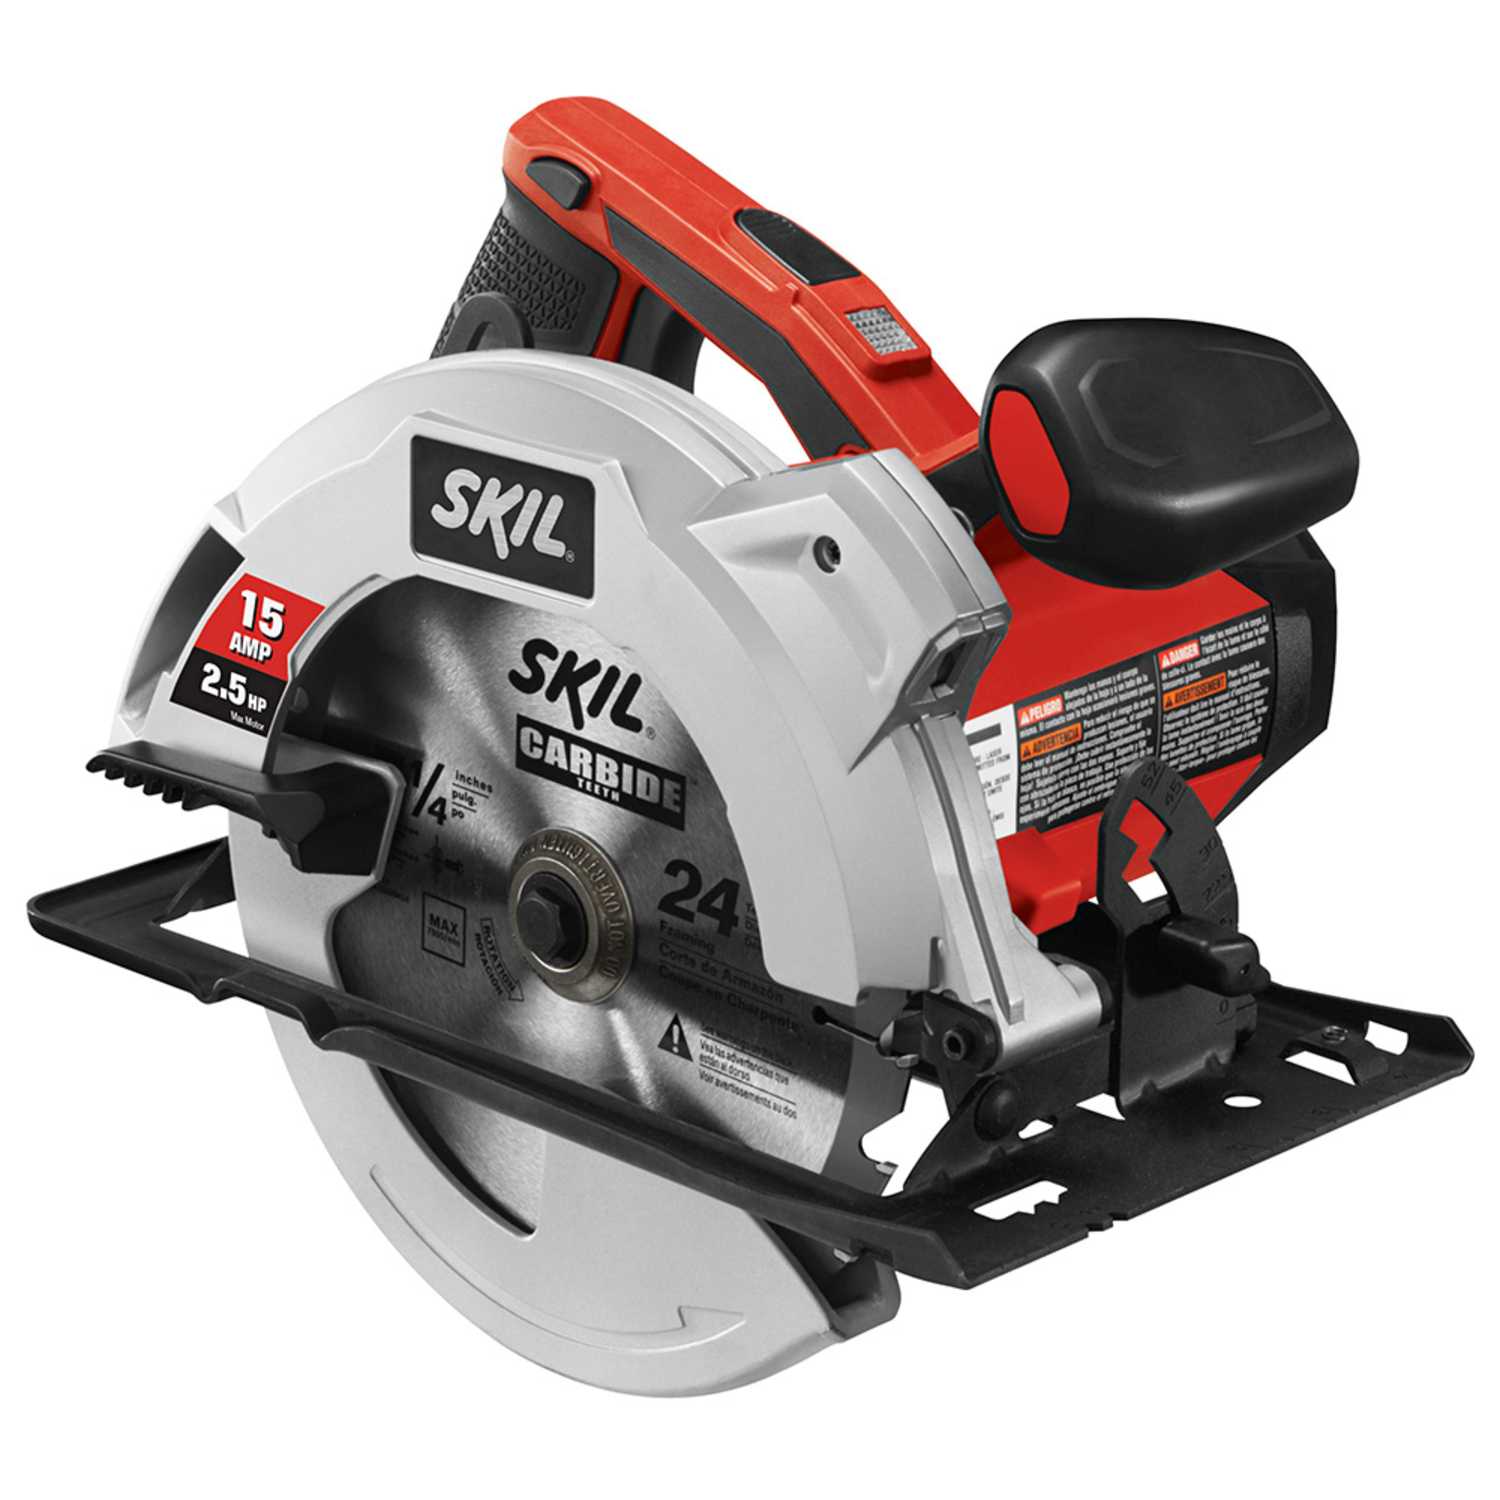 SKILSAW 7-1/4 in. Corded 15 amps Circular Saw Kit 5300 rpm